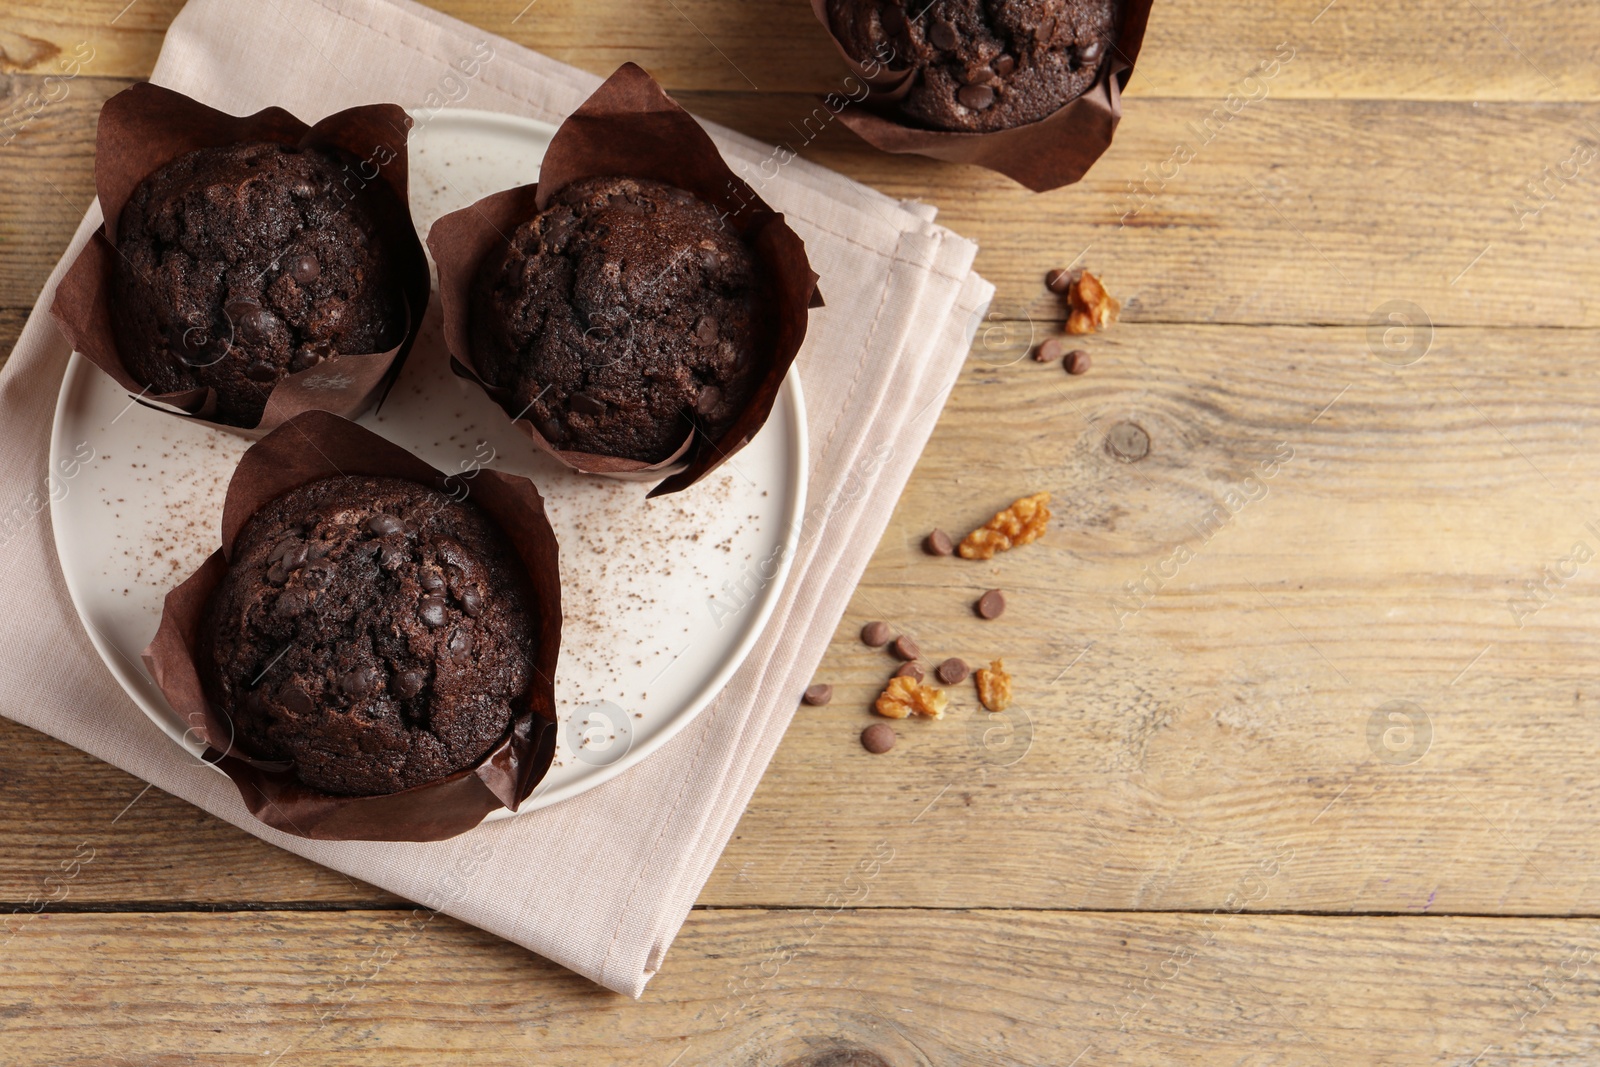 Photo of Tasty chocolate muffins on wooden table, top view. Space for text